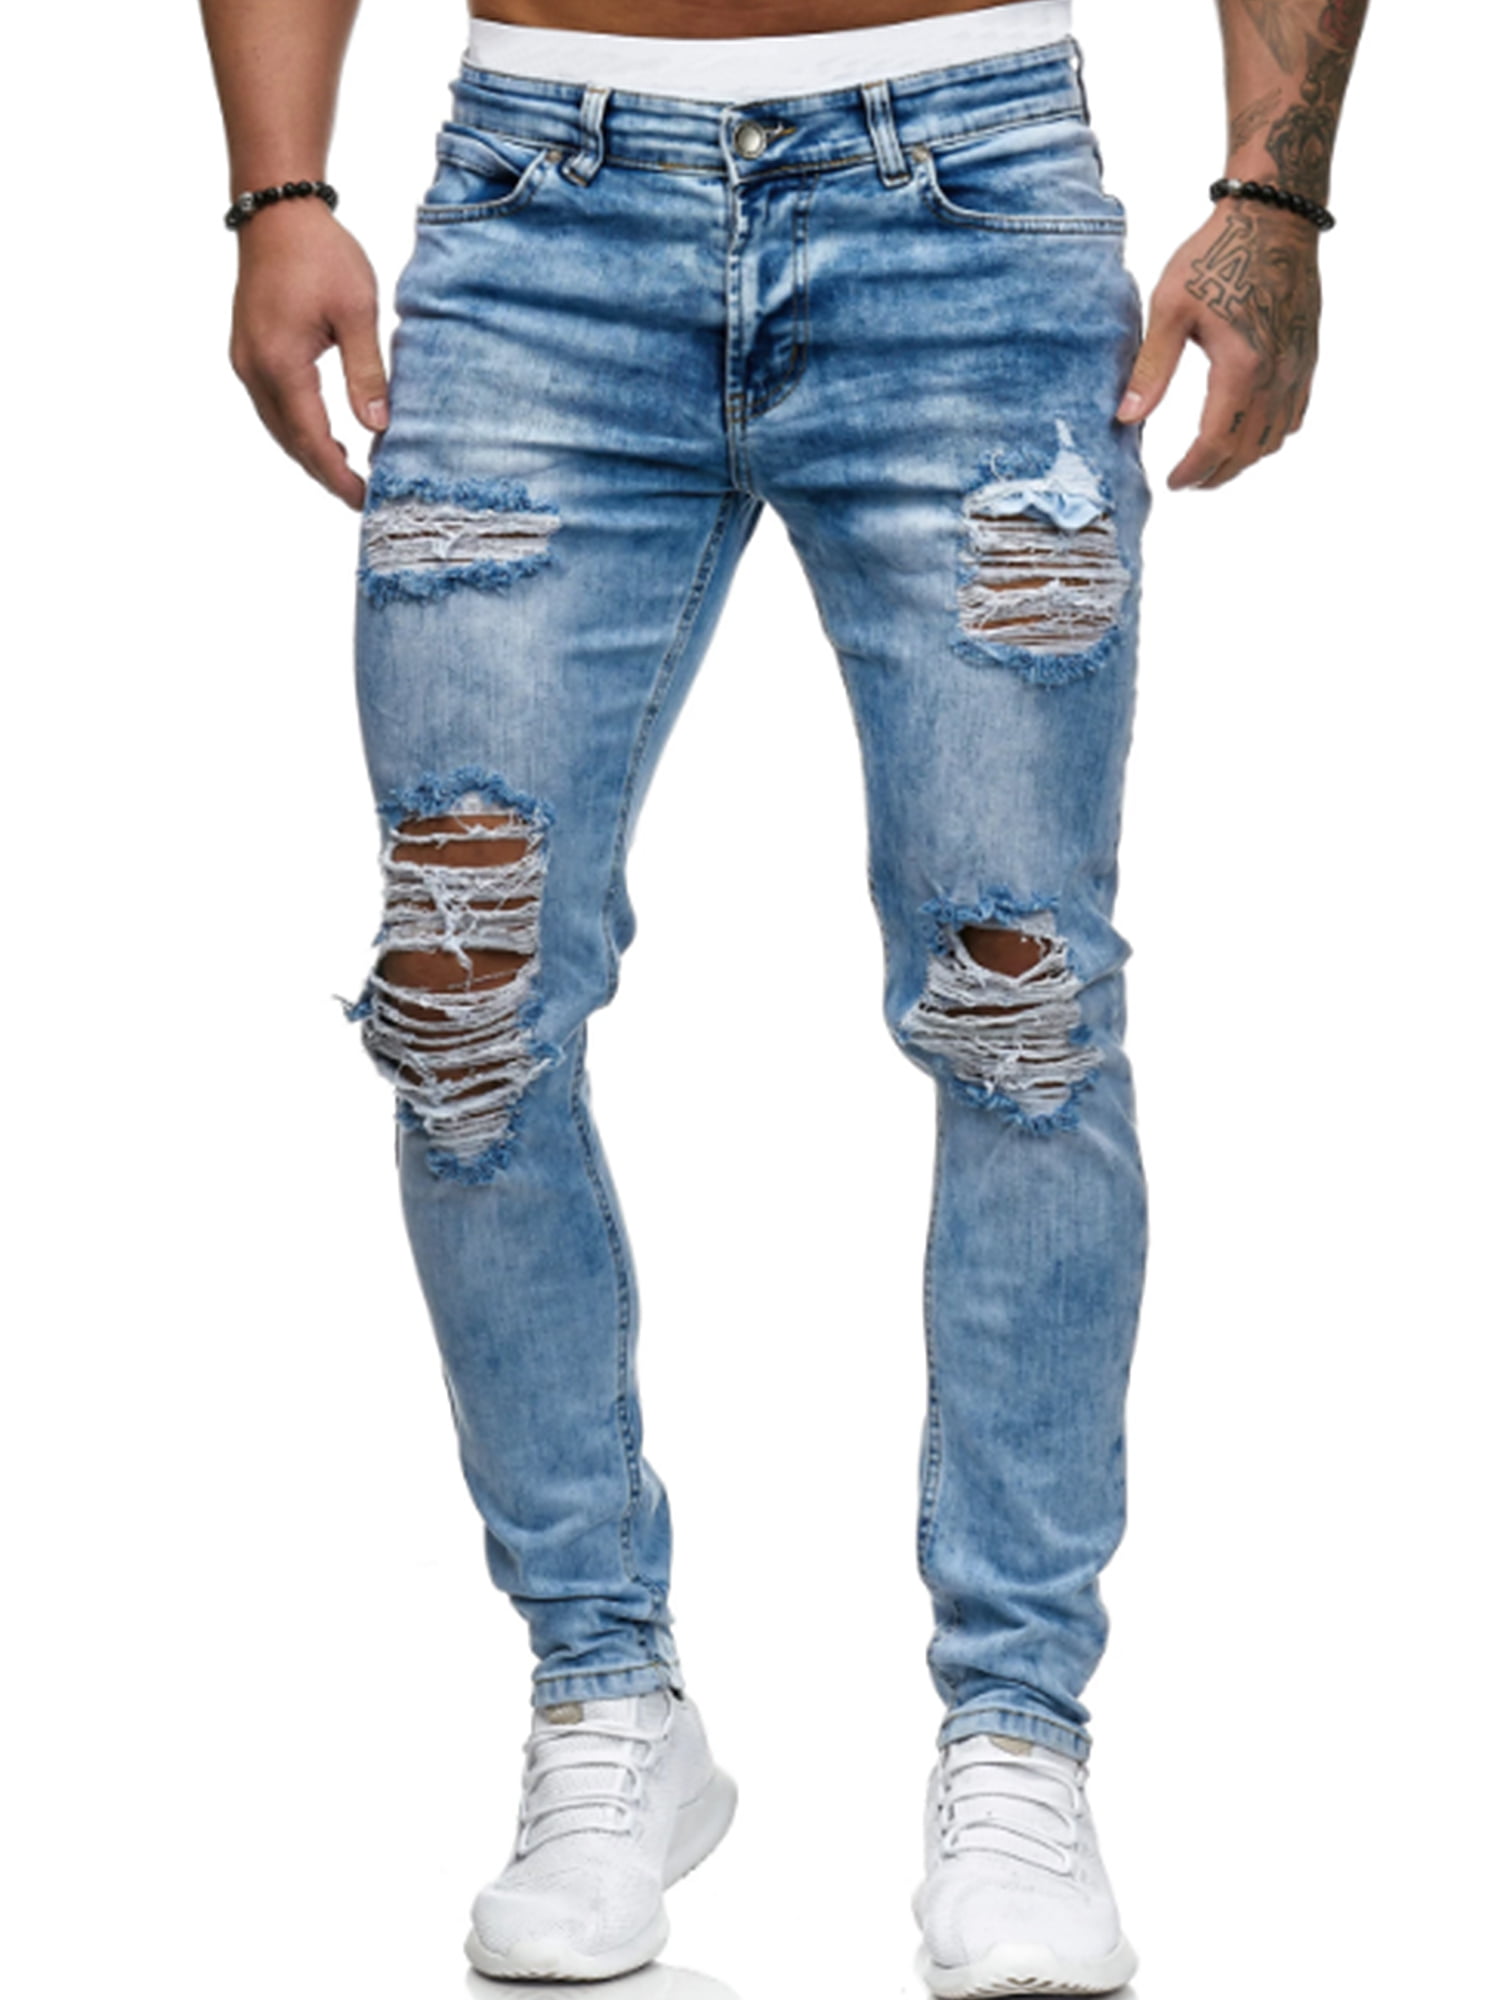 Stylish Chain Decorated Hole in Leg Ripped Jeans